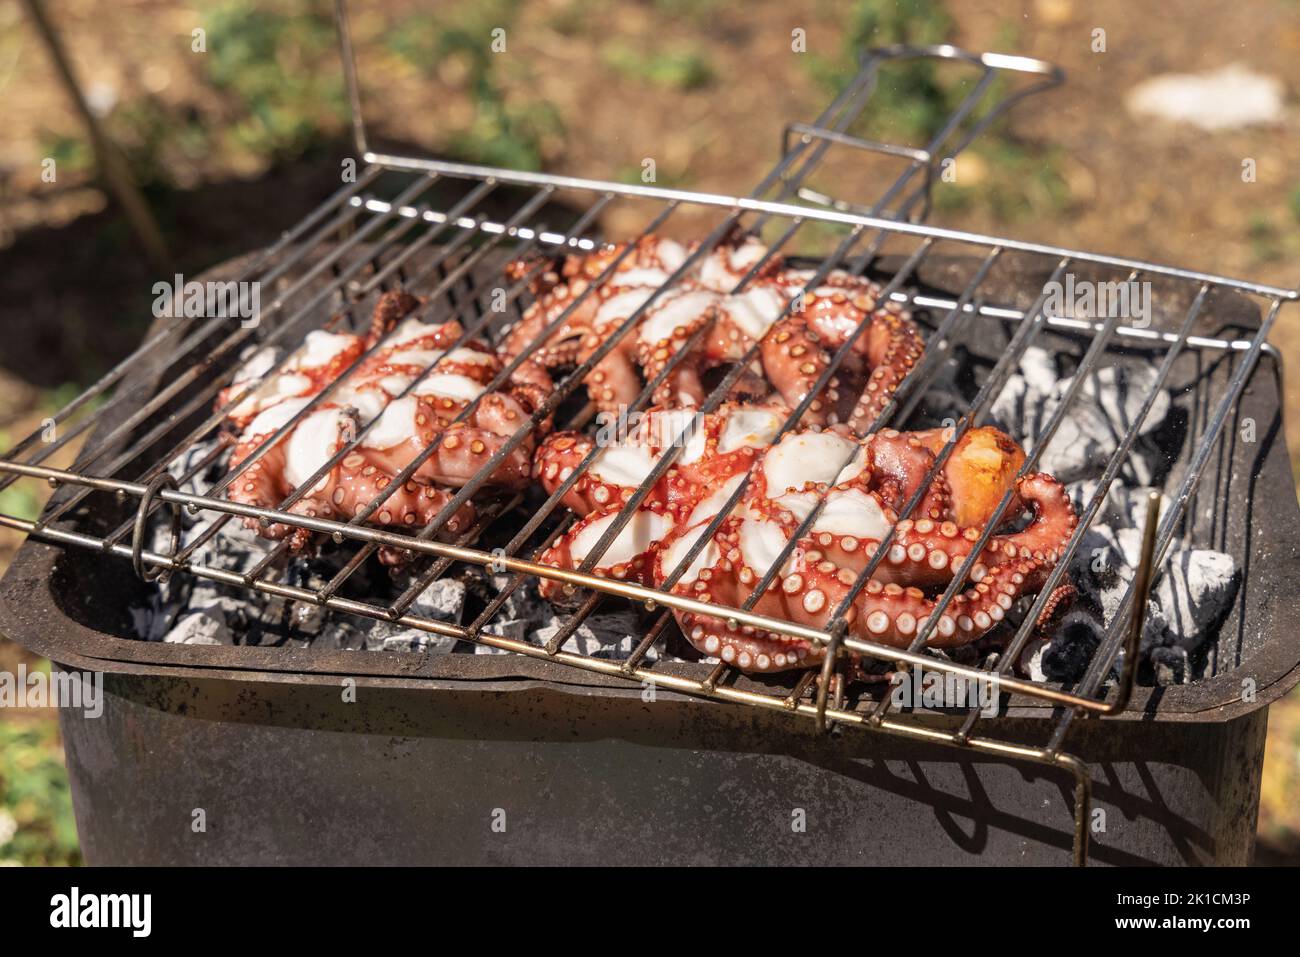 Fresh octopuses on the charcoal grill, Italy. Traditional Mediterranean cuisine. Grilling seafood outdoor with friends during summer time. Rustic styl Stock Photo